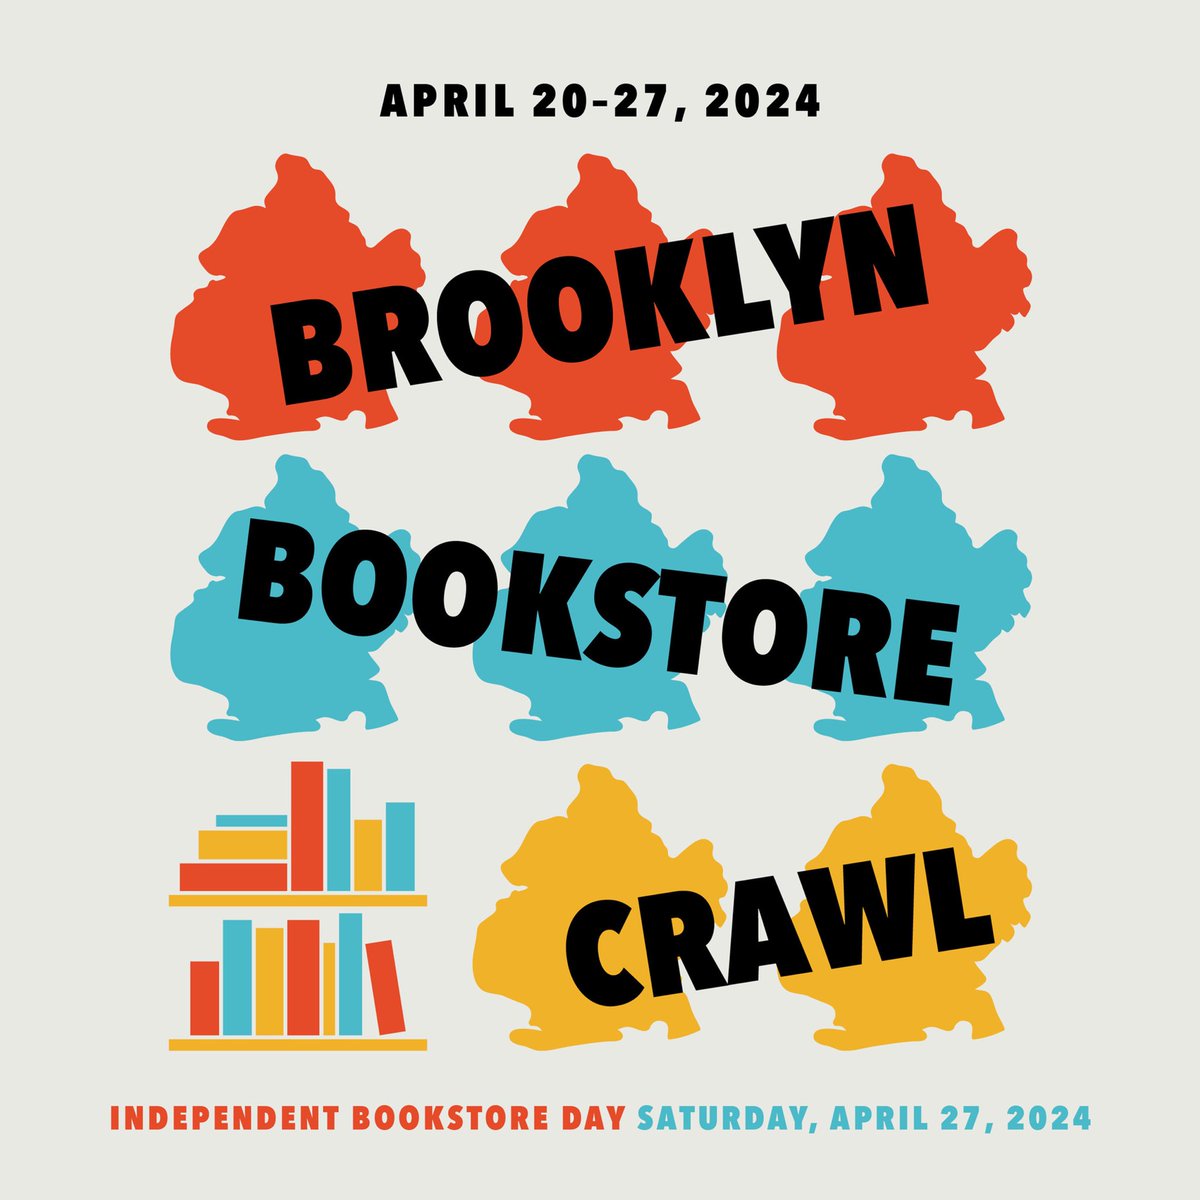 Today is the first day of the #BrooklynBookstoreCrawl! Come in and get your passport! We’re open 11-8 today!